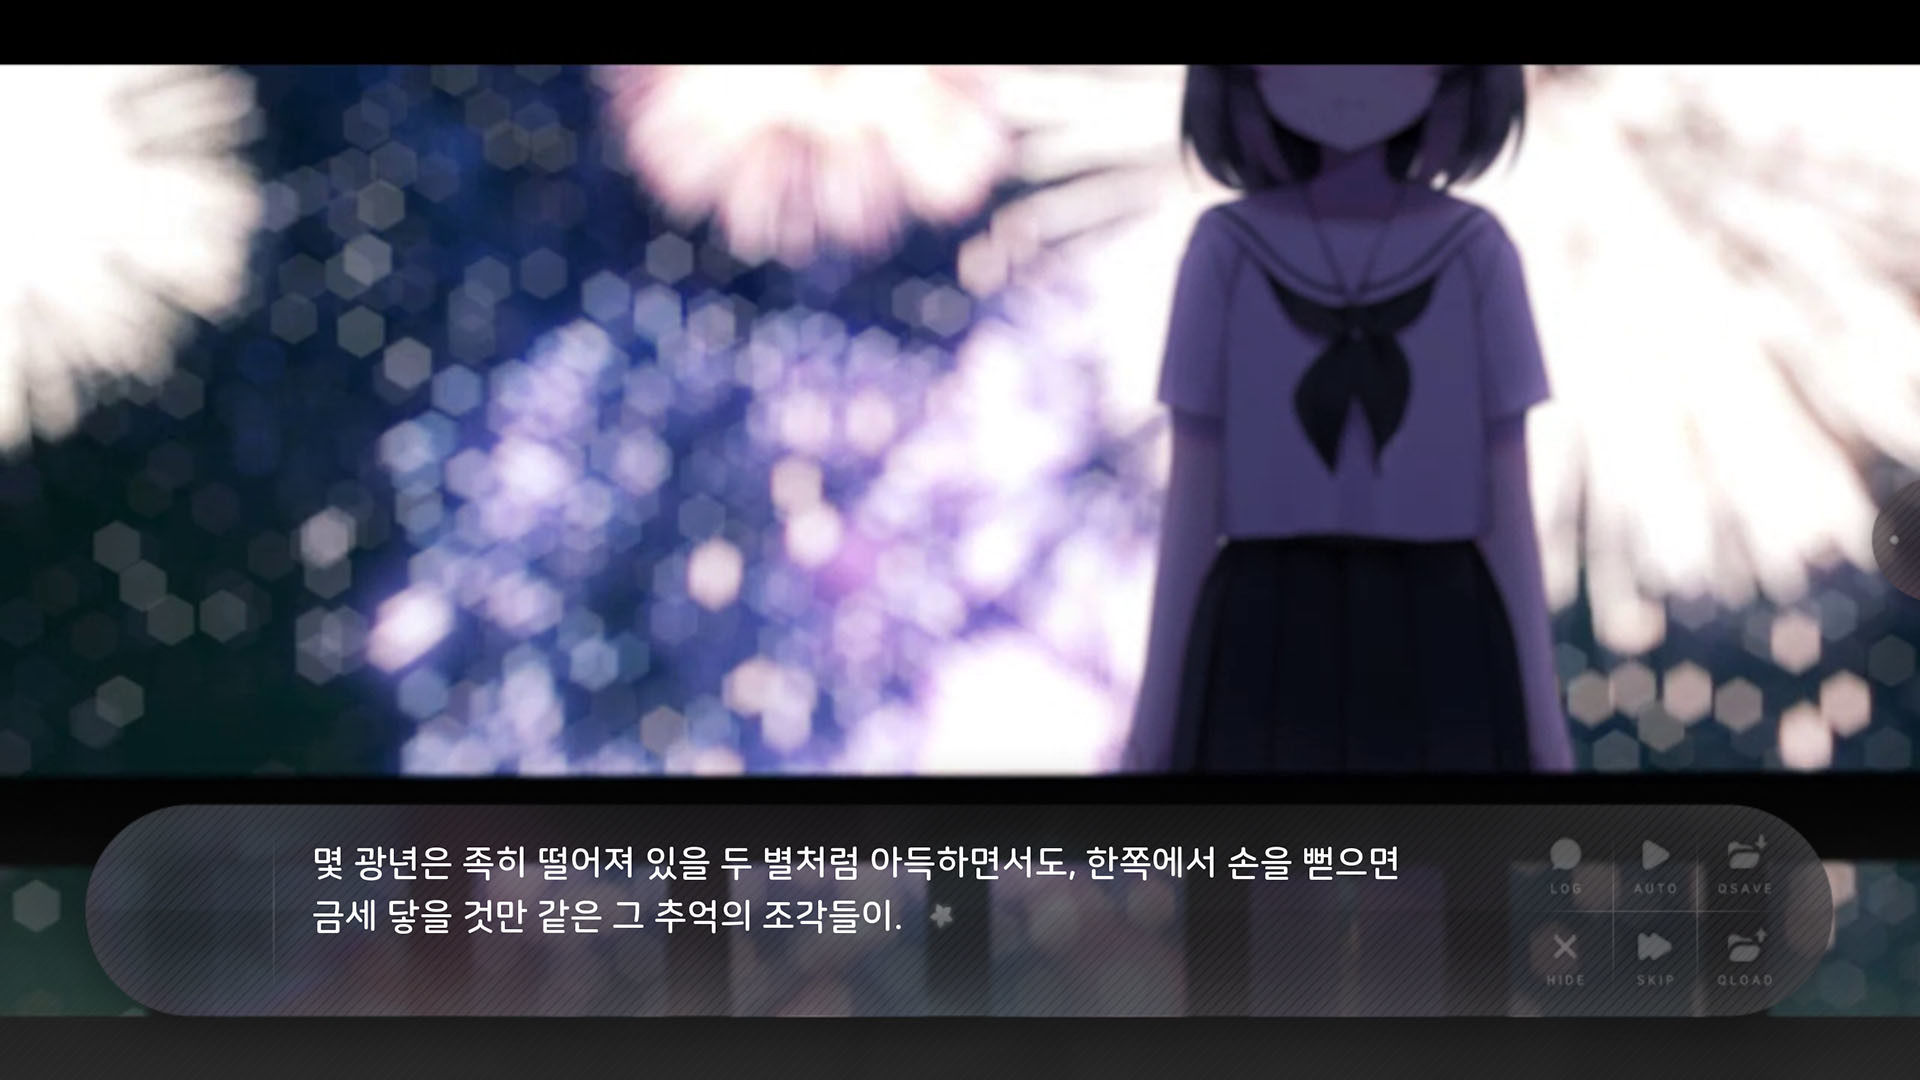 Flowers Blooming at the End of Summer screenshot